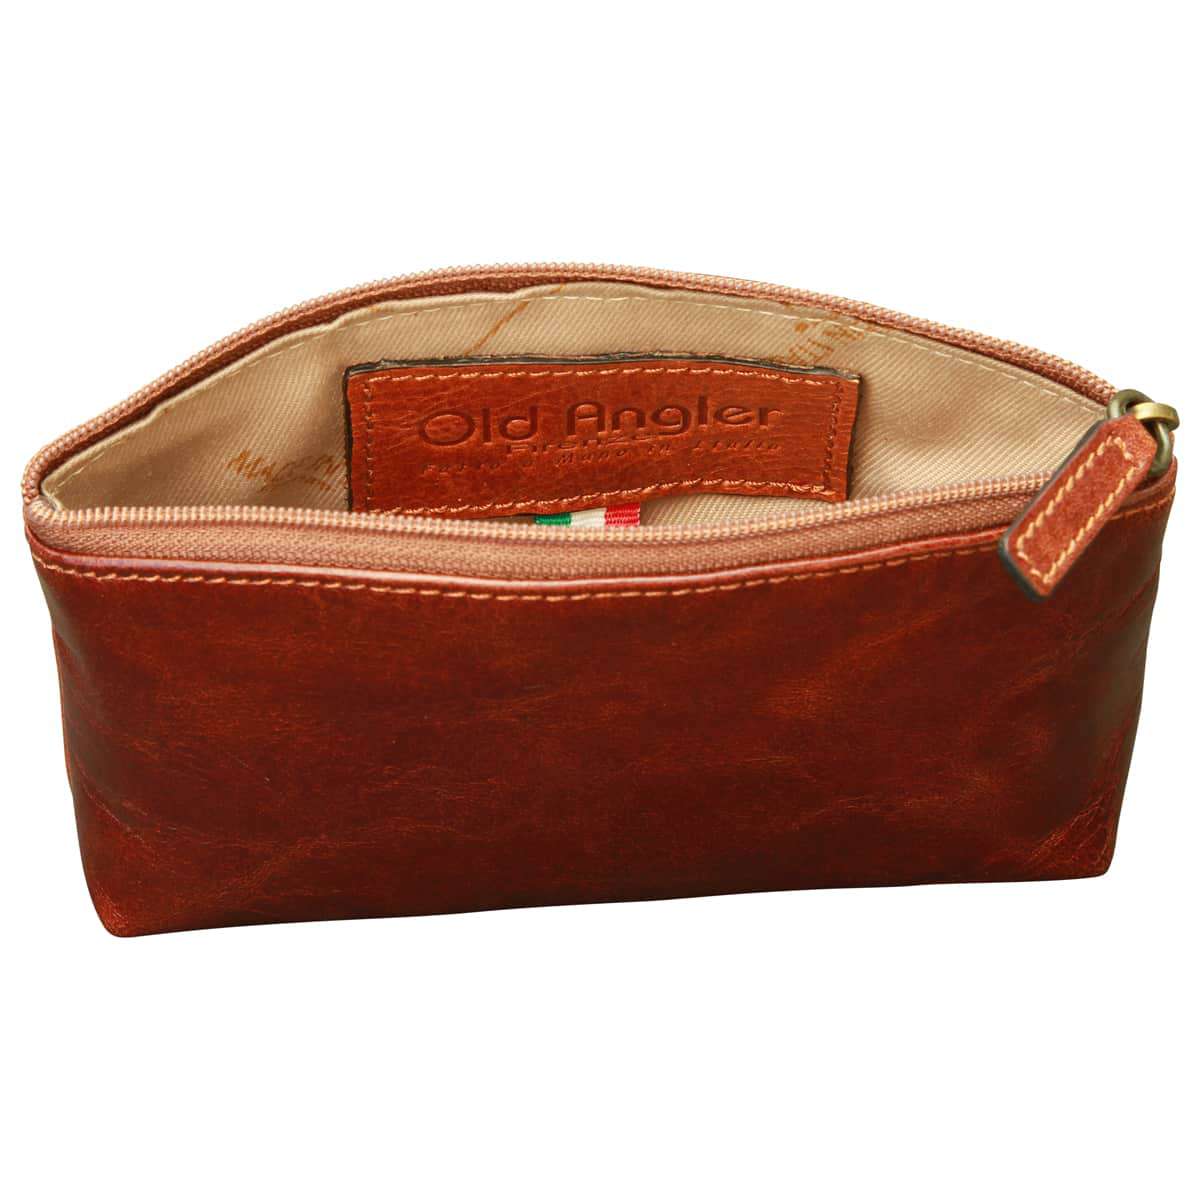 Italian leather beauty case - Brown | 407705MA US | Old Angler Firenze